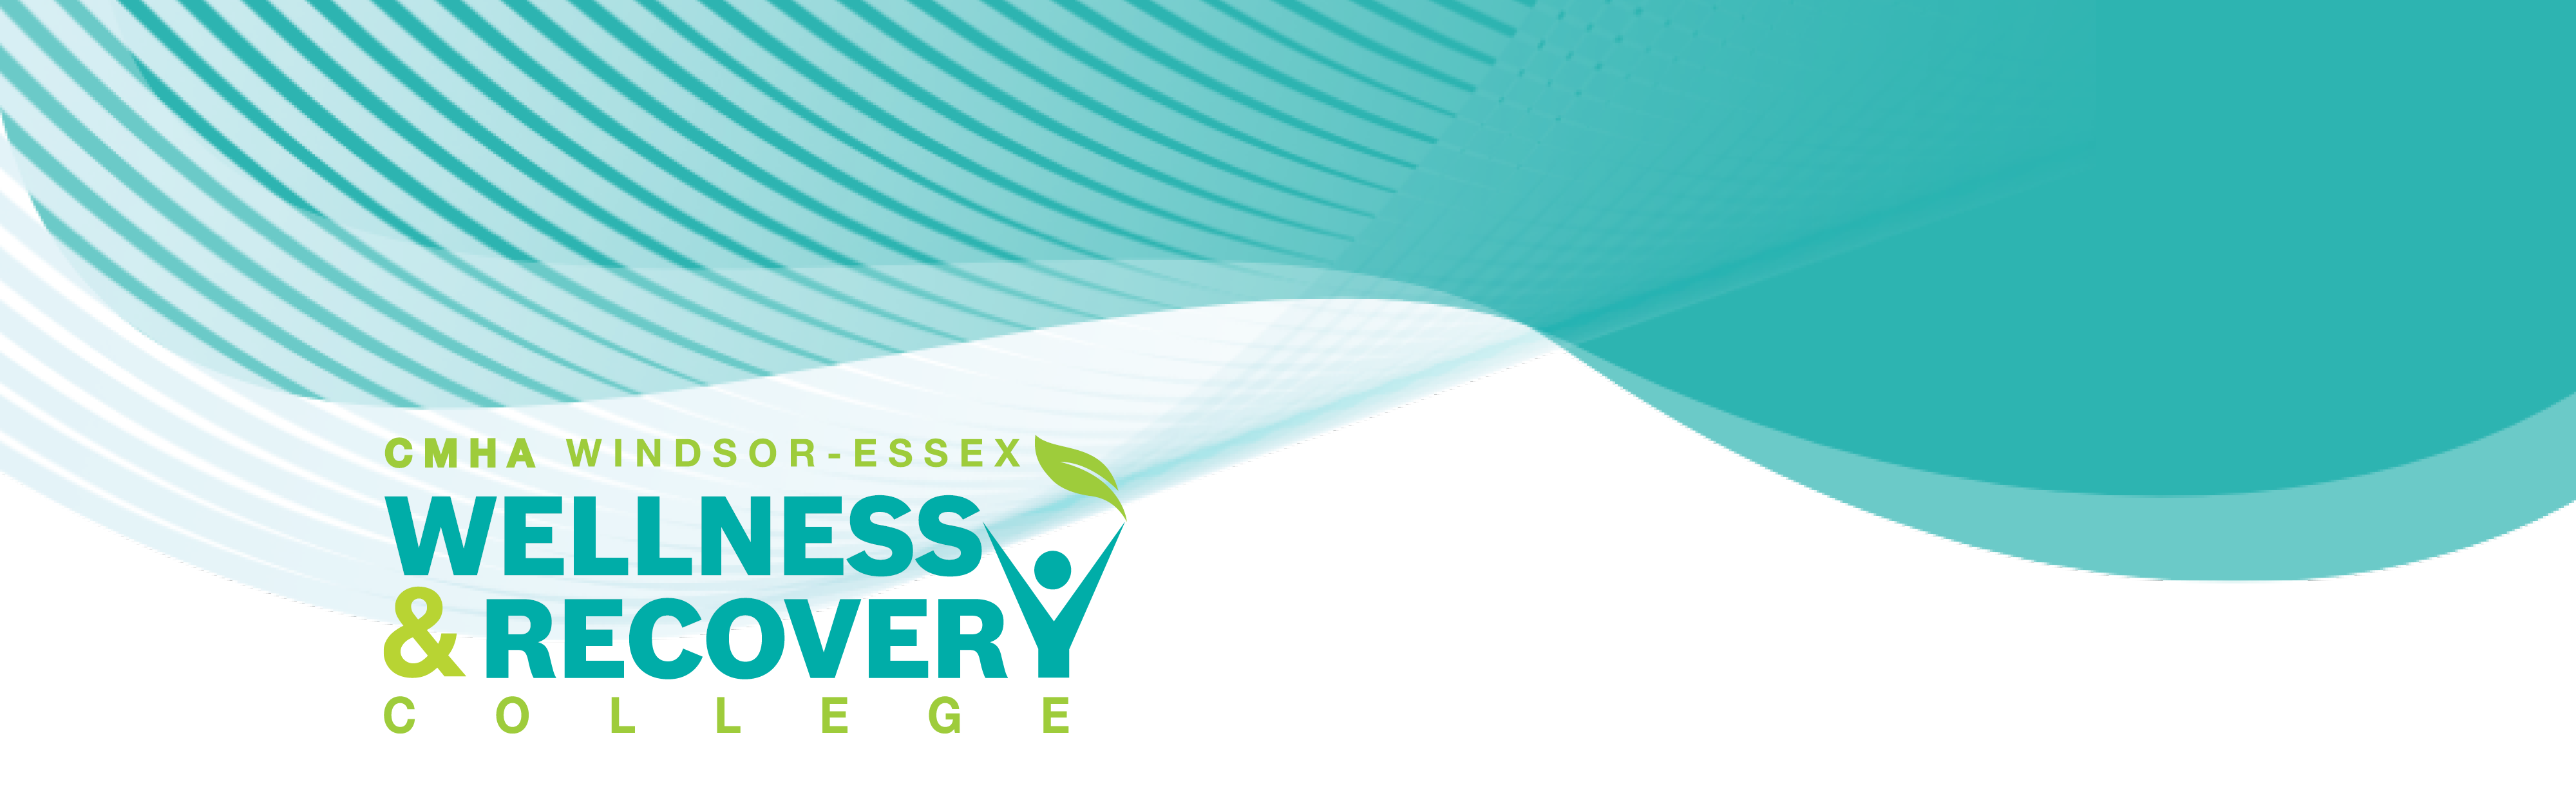 WELLNESS & RECOVERY COLLEGE: Our Journey